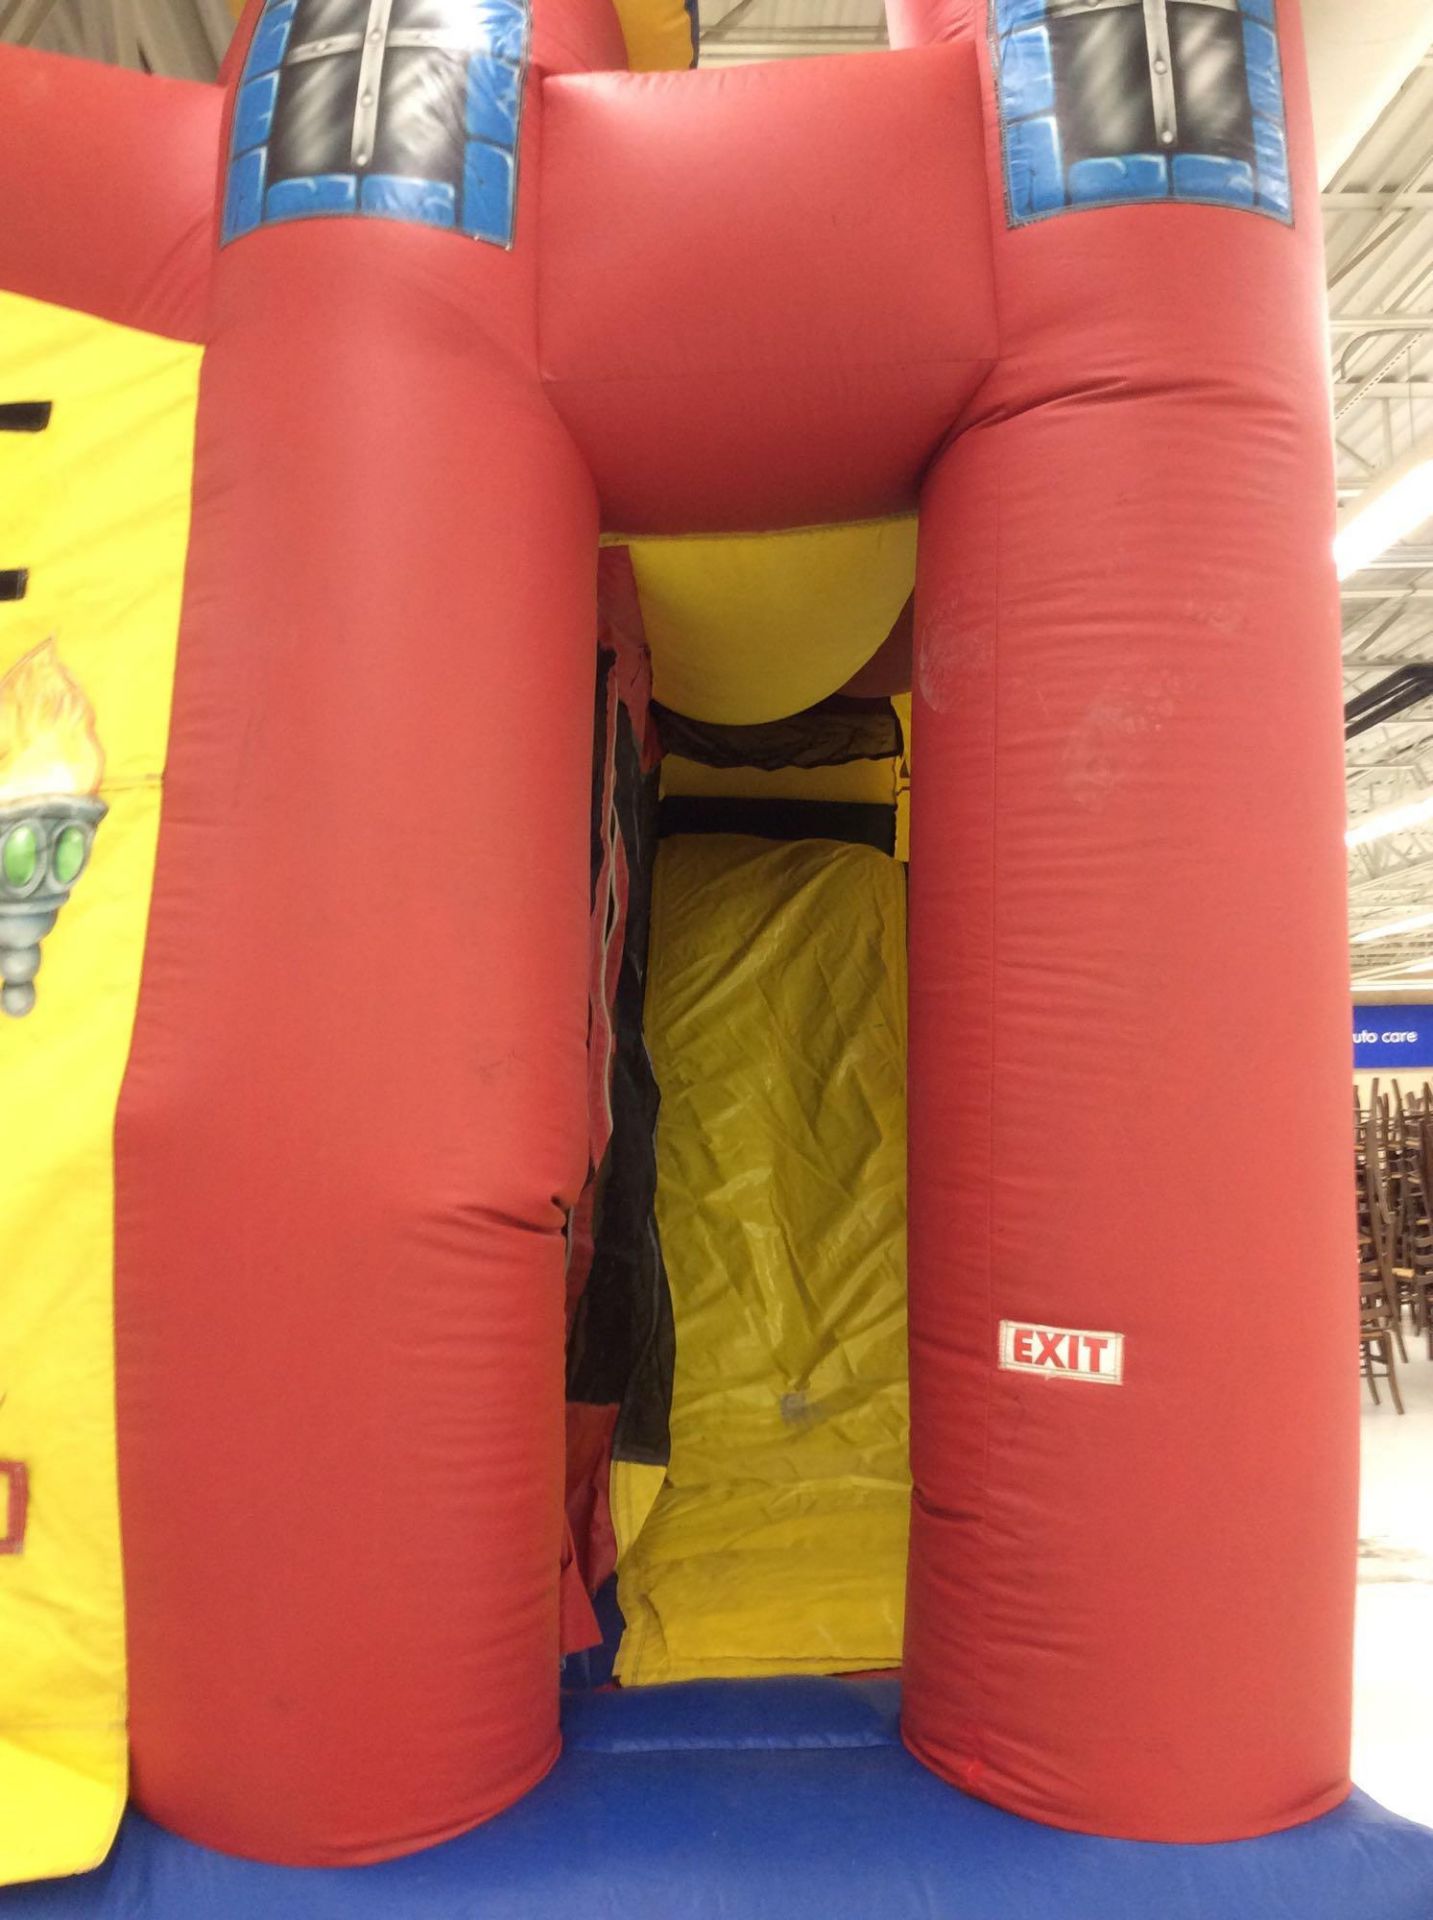 Inflatables.com brand 5-in-1 inflatable bounce with blower, approx. 15' x 20' overall - Image 3 of 4